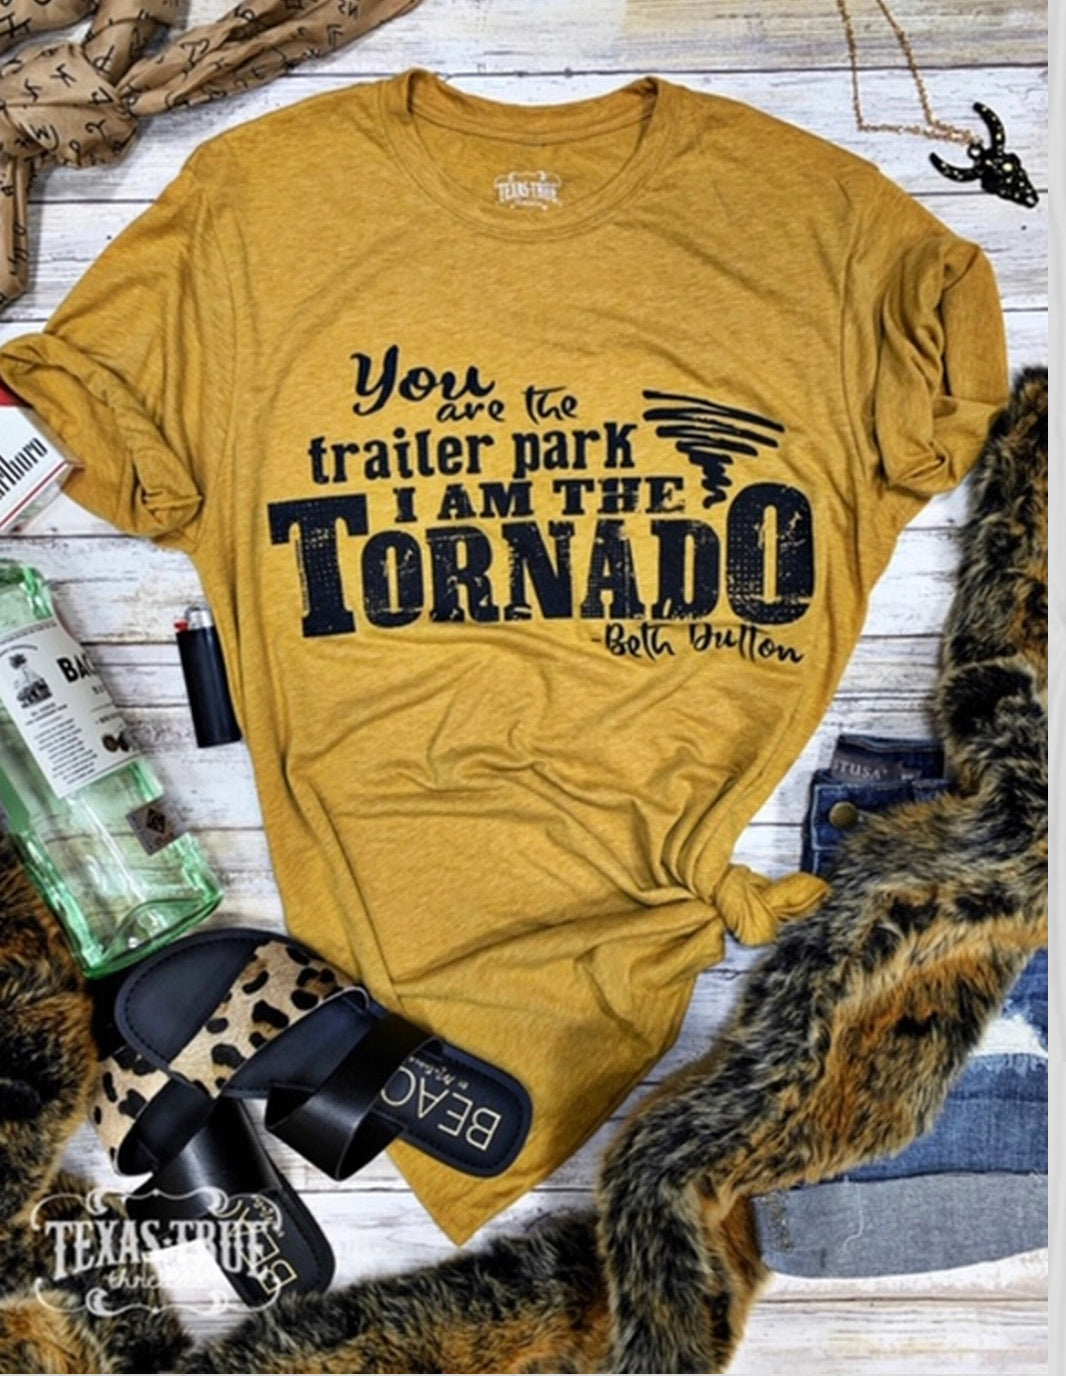 Yellowstone-You are the Trailer Park-I am the Tornado - Forever Western Boutique